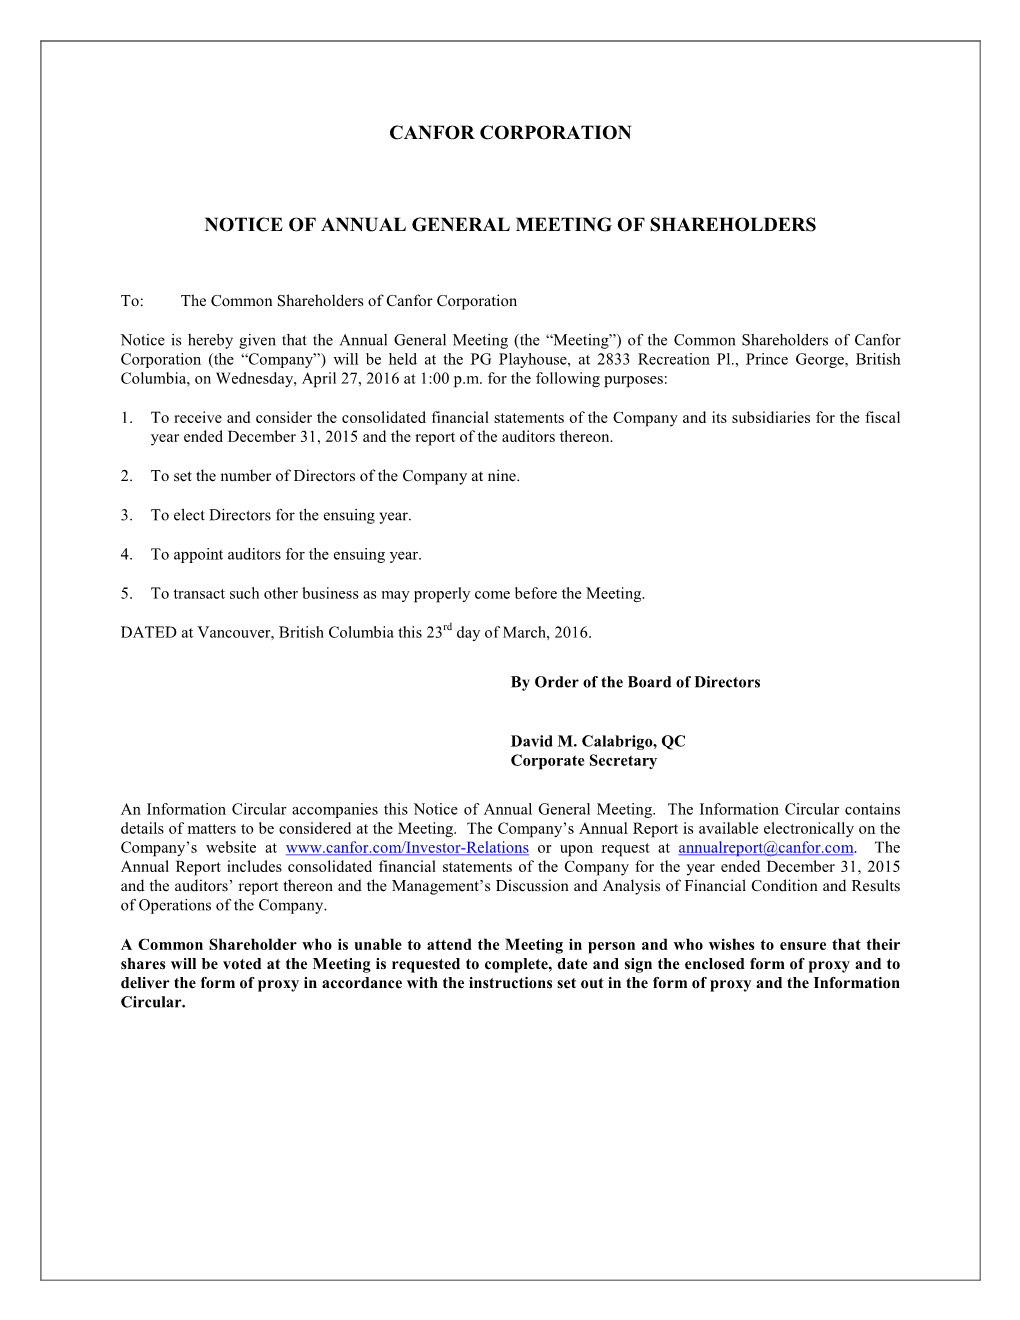 Information Circular Accompanies This Notice of Annual General Meeting